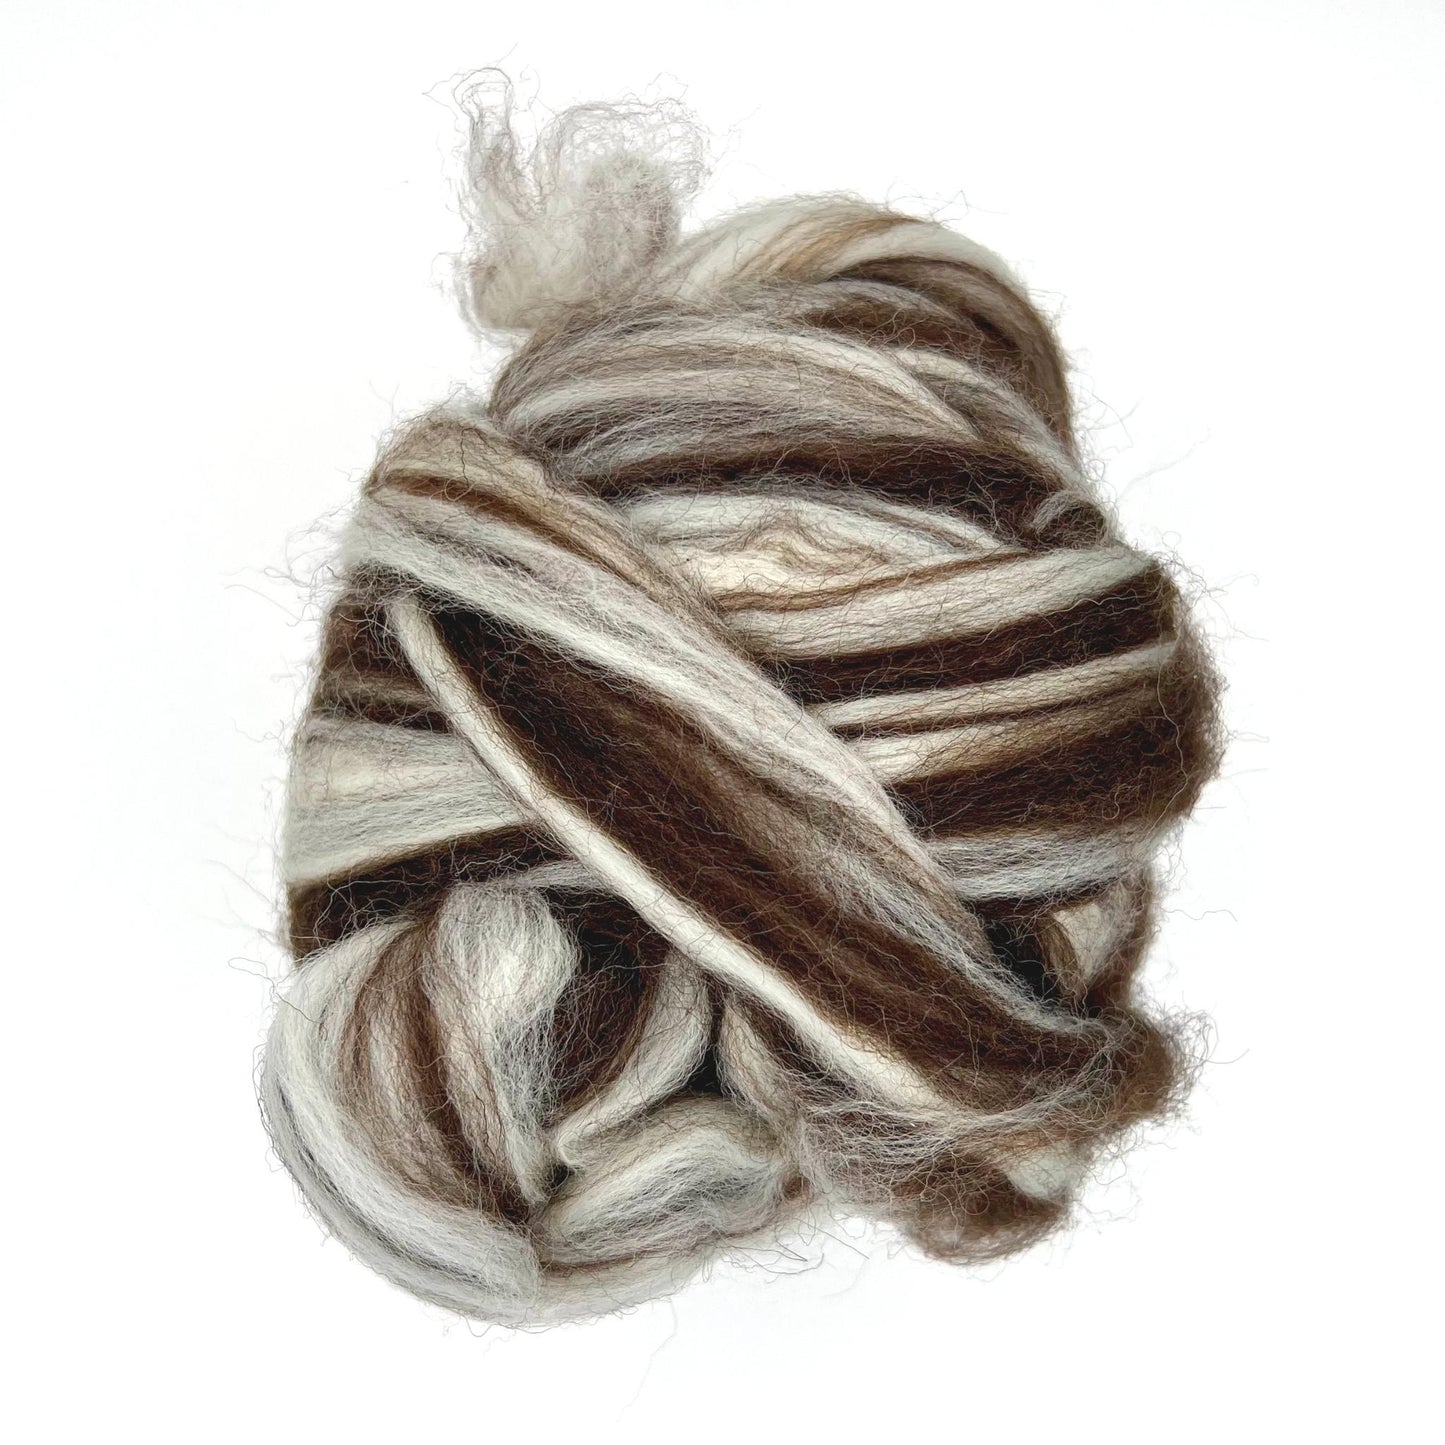 Yin Yang Natural Blend of Corriedale Wool Roving (8 Ounces) |  Cleaned and Combed Core Wool